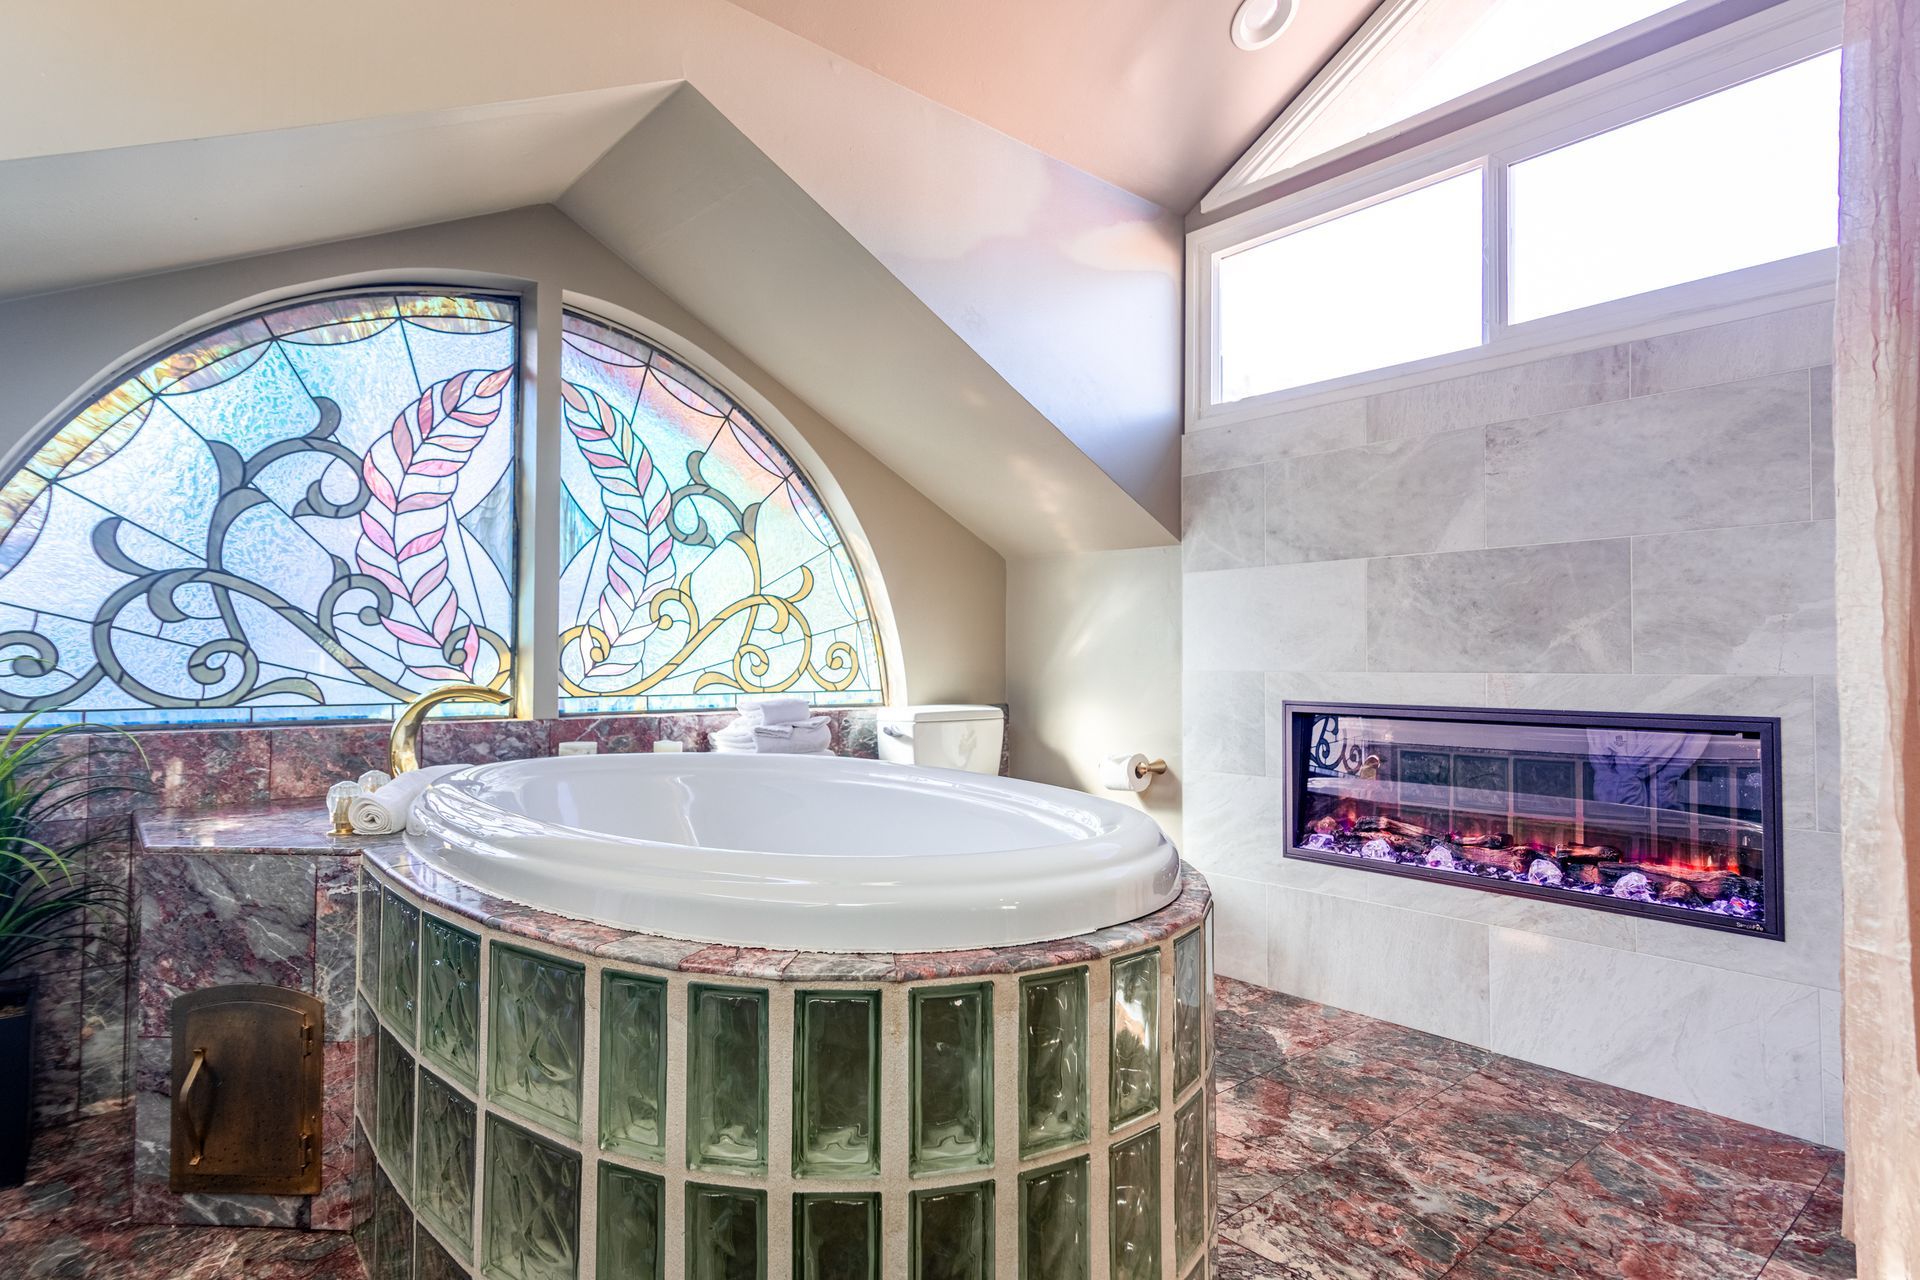 A bathroom with a tub , fireplace and stained glass window.